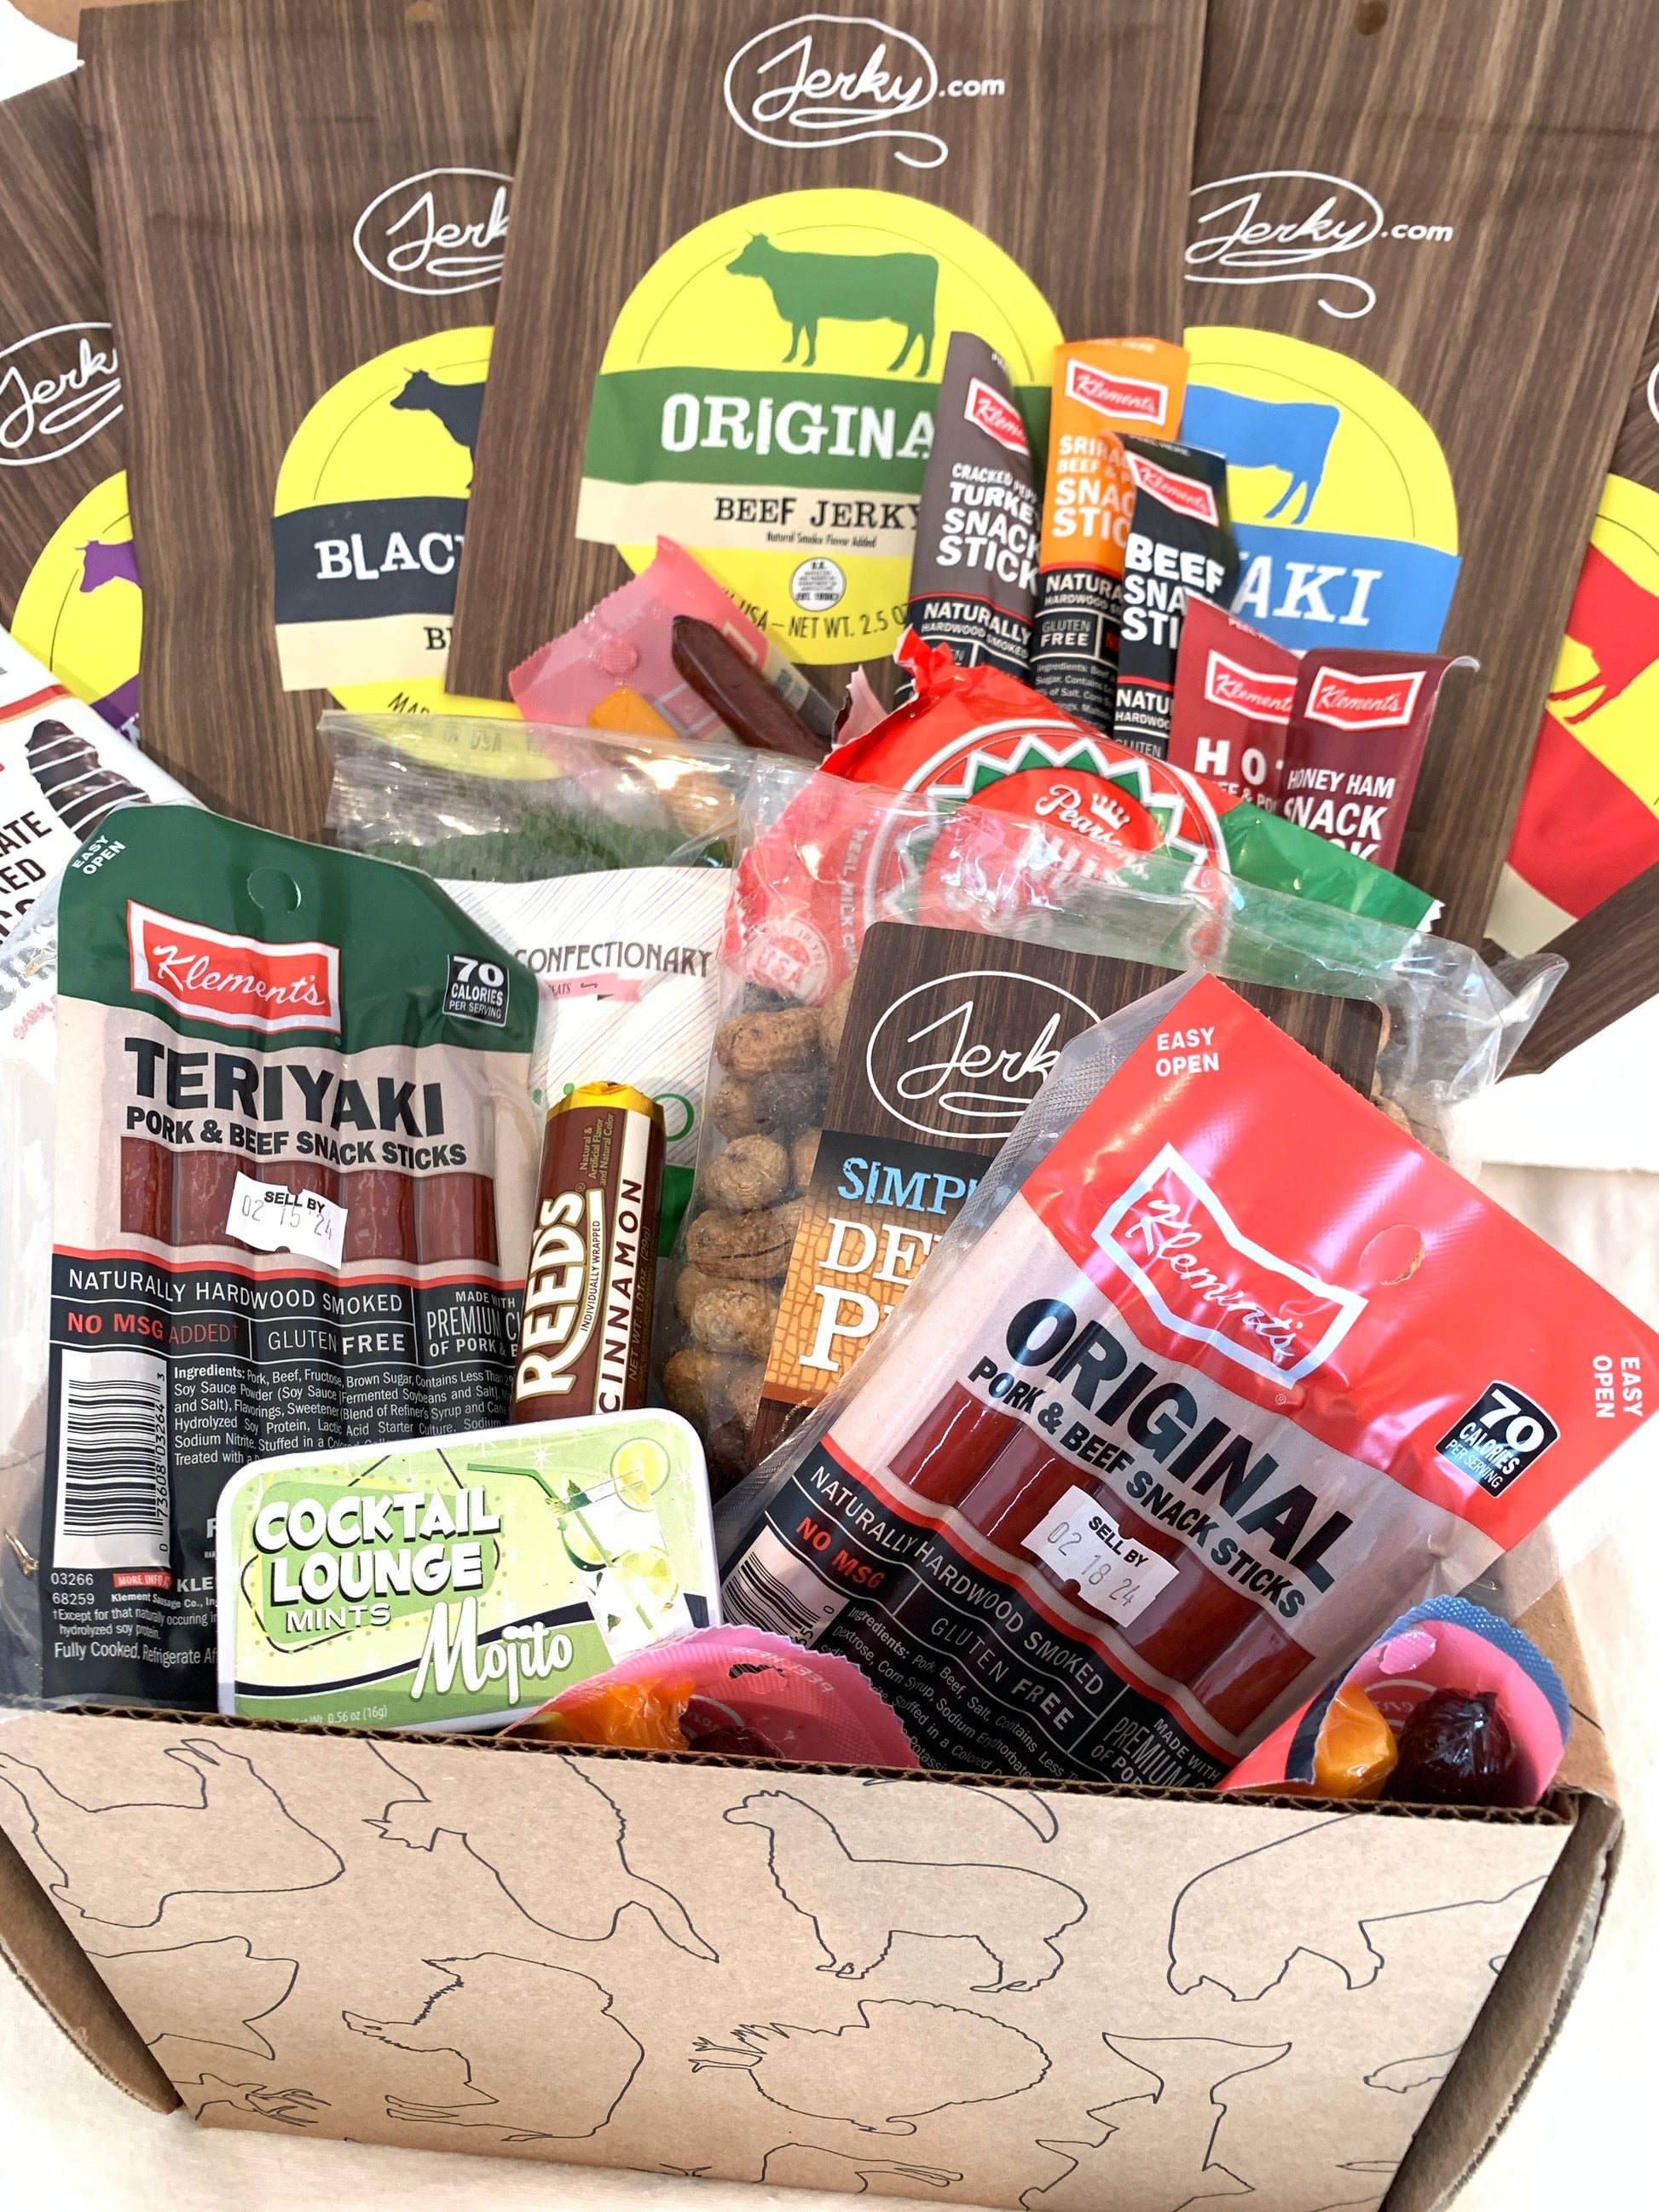 Snack Lover's Gift Box by Jerky.com